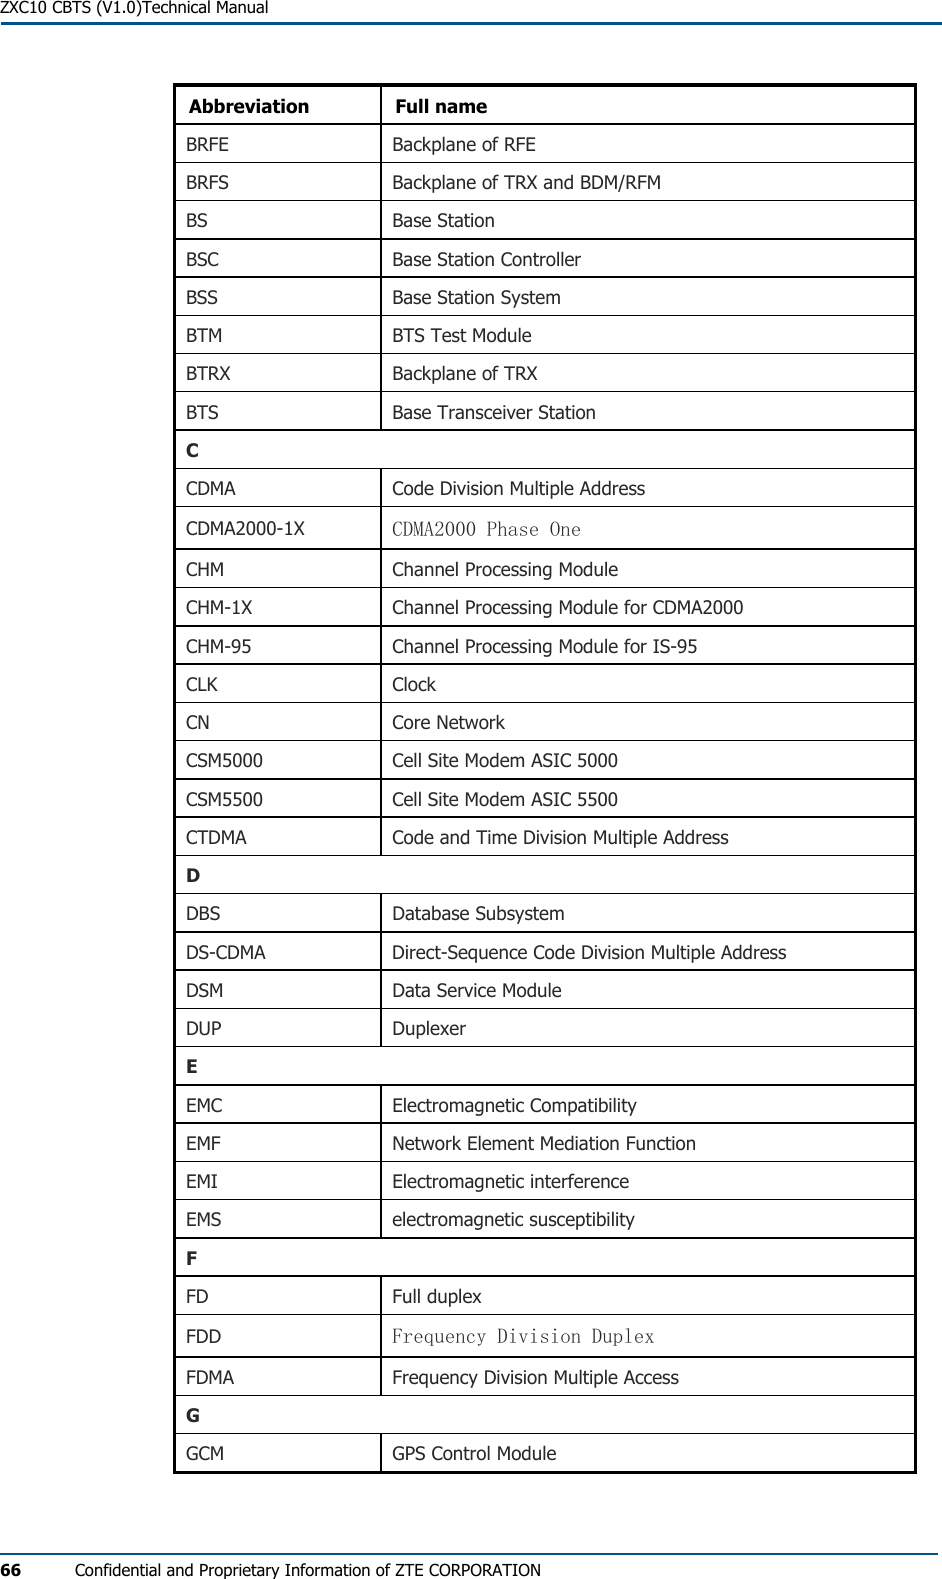  ZXC10 CBTS (V1.0)Technical Manual 66  Confidential and Proprietary Information of ZTE CORPORATION Abbreviation Full name BRFE  Backplane of RFE BRFS  Backplane of TRX and BDM/RFM BS Base Station BSC  Base Station Controller BSS  Base Station System BTM  BTS Test Module BTRX  Backplane of TRX BTS  Base Transceiver Station C CDMA  Code Division Multiple Address CDMA2000-1X  CDMA2000 Phase One CHM  Channel Processing Module CHM-1X  Channel Processing Module for CDMA2000 CHM-95  Channel Processing Module for IS-95 CLK Clock CN Core Network CSM5000  Cell Site Modem ASIC 5000 CSM5500  Cell Site Modem ASIC 5500 CTDMA  Code and Time Division Multiple Address D DBS Database Subsystem DS-CDMA  Direct-Sequence Code Division Multiple Address DSM  Data Service Module DUP Duplexer E EMC Electromagnetic Compatibility EMF  Network Element Mediation Function EMI Electromagnetic interference EMS electromagnetic susceptibility F FD Full duplex FDD  Frequency Division Duplex FDMA  Frequency Division Multiple Access G GCM  GPS Control Module 